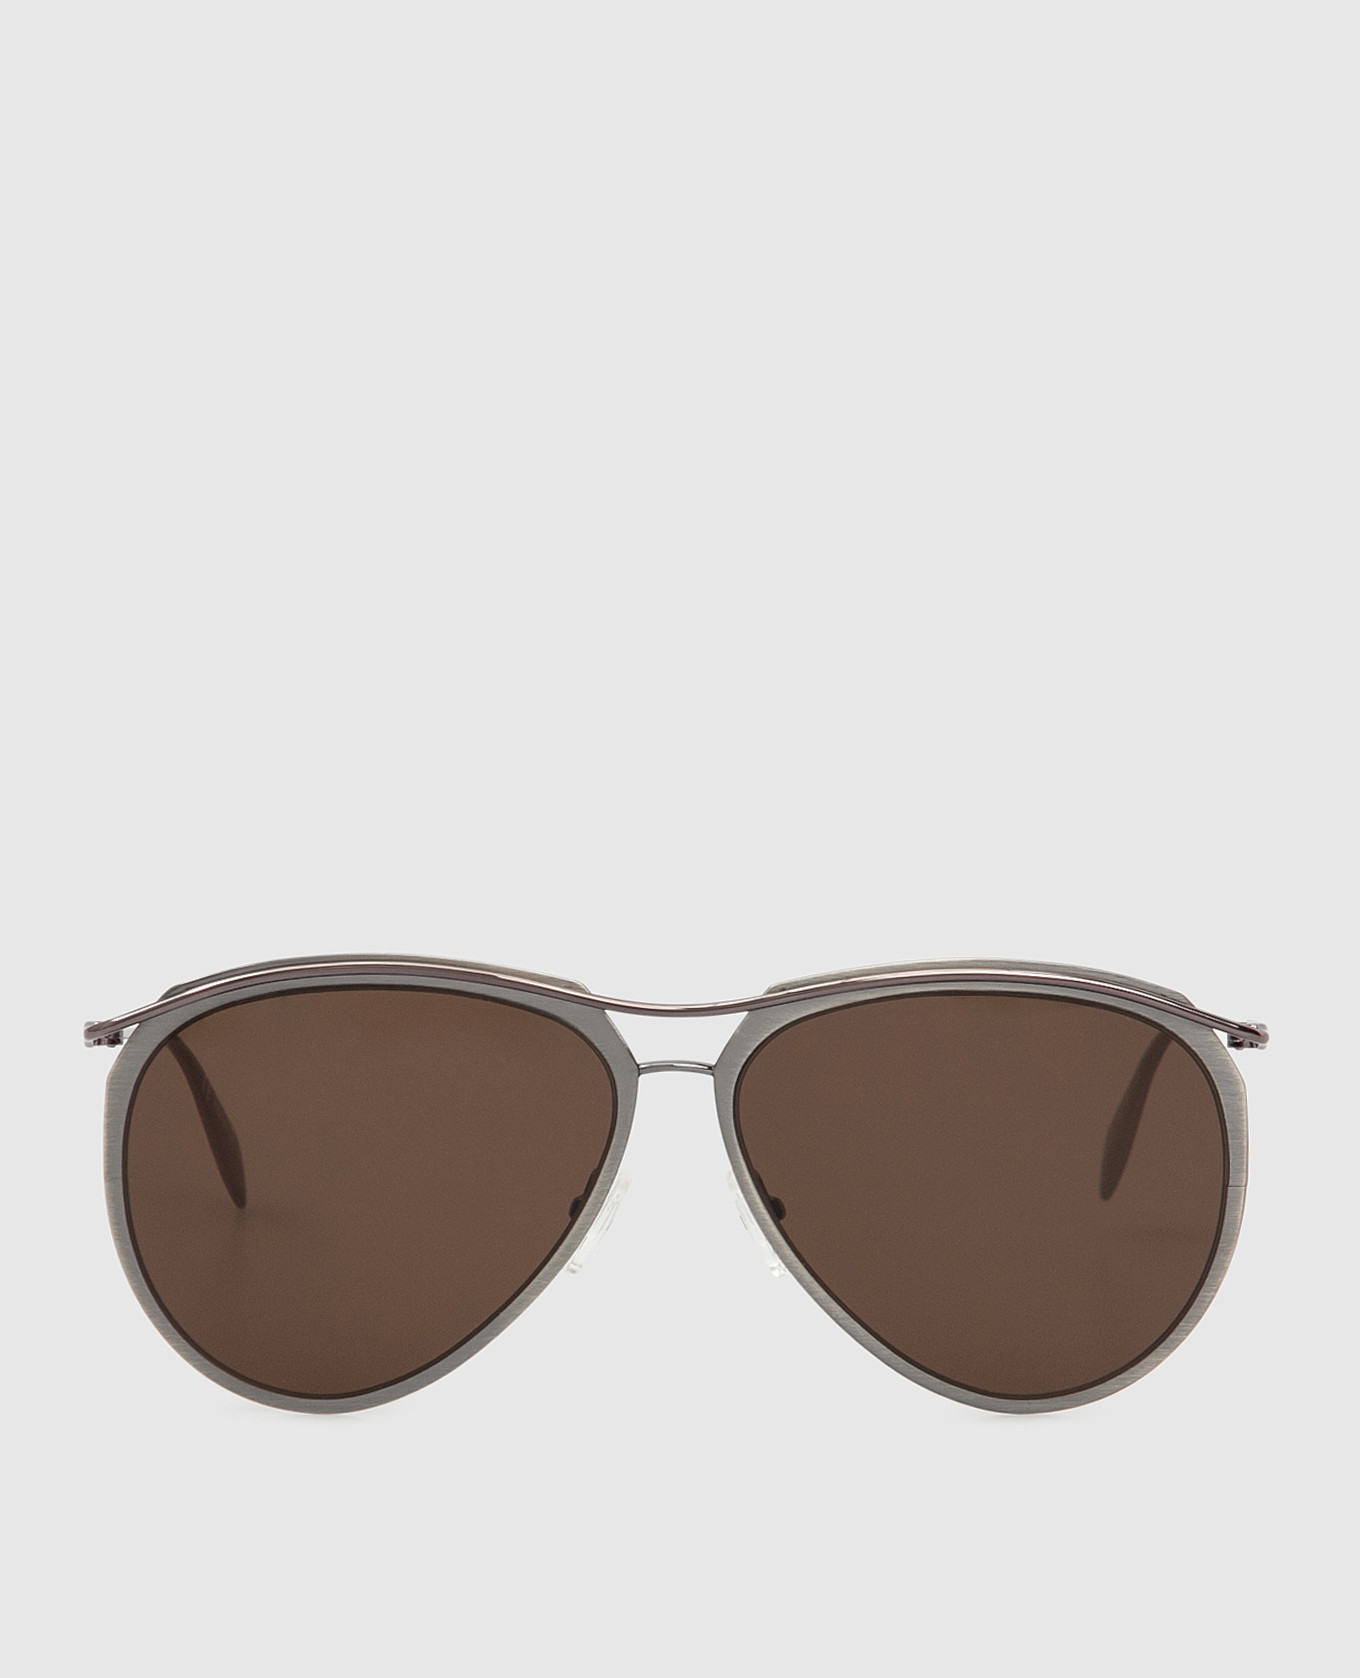 Aviator sunglasses with brown lenses